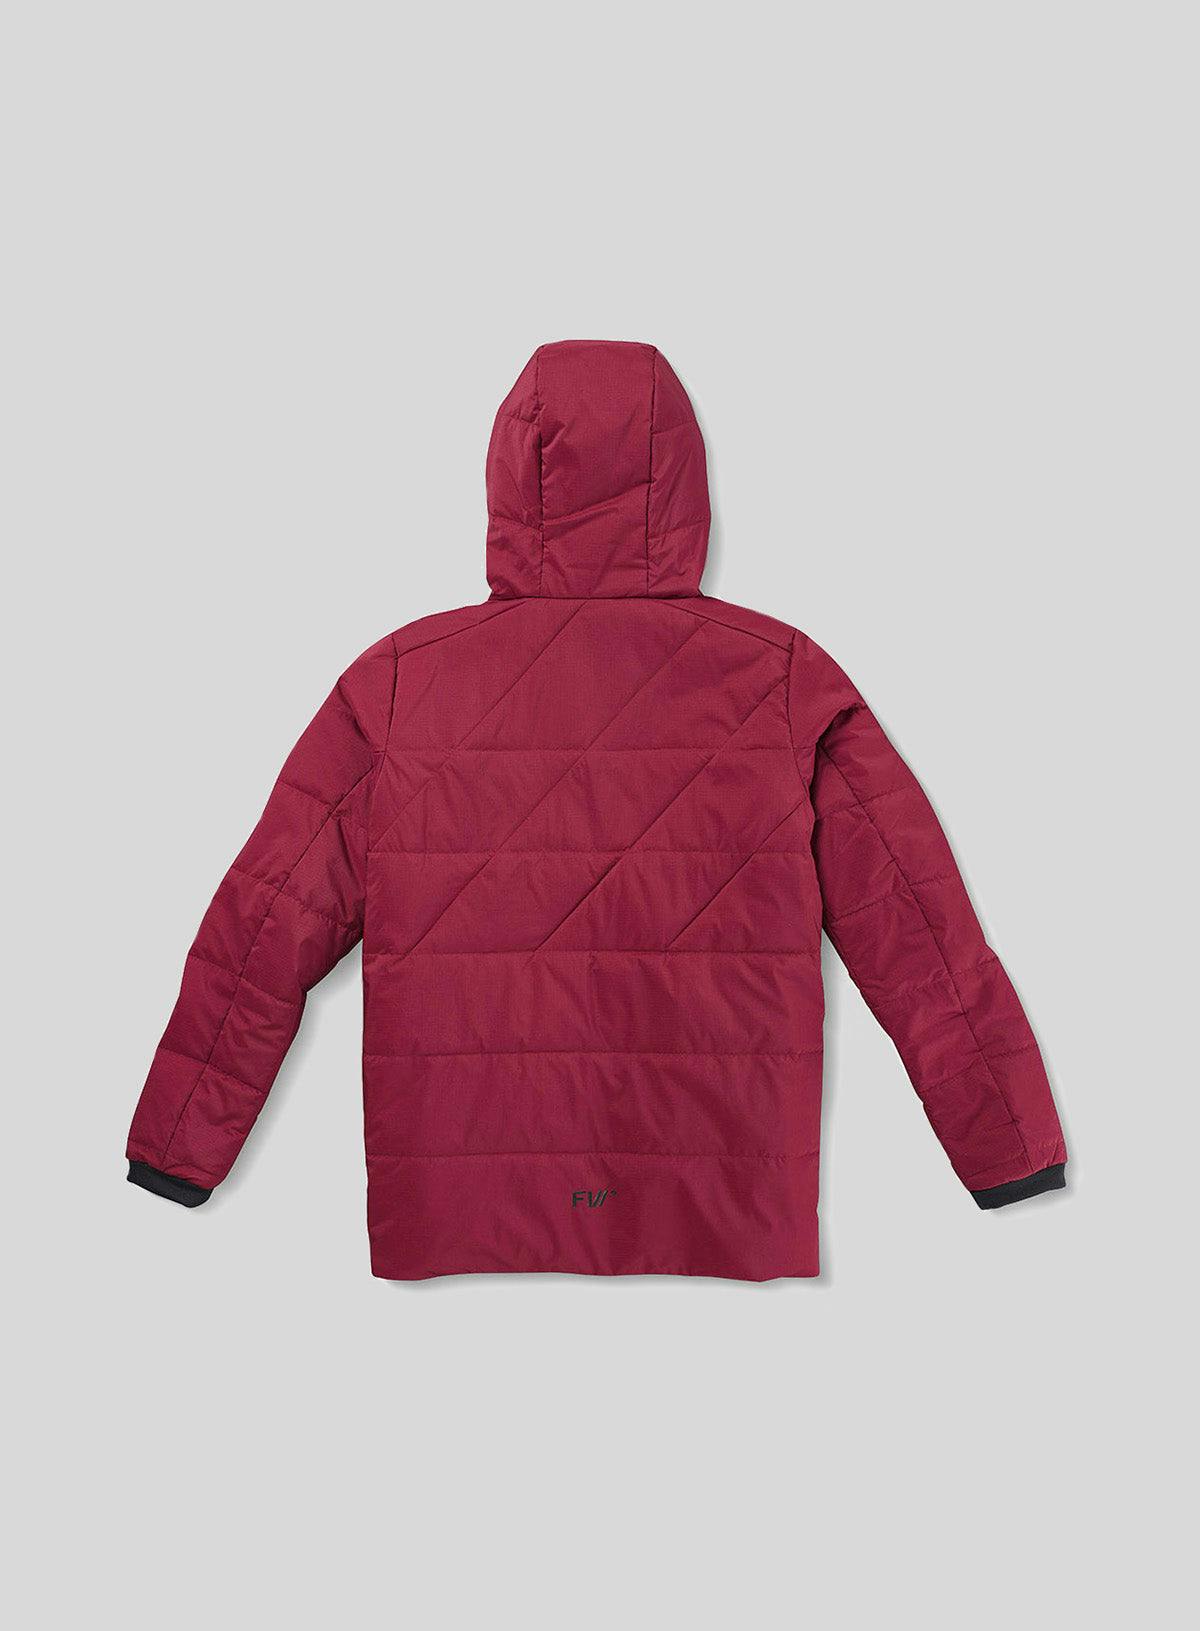 FW Men's Manifest Quilted Insulated Anorak